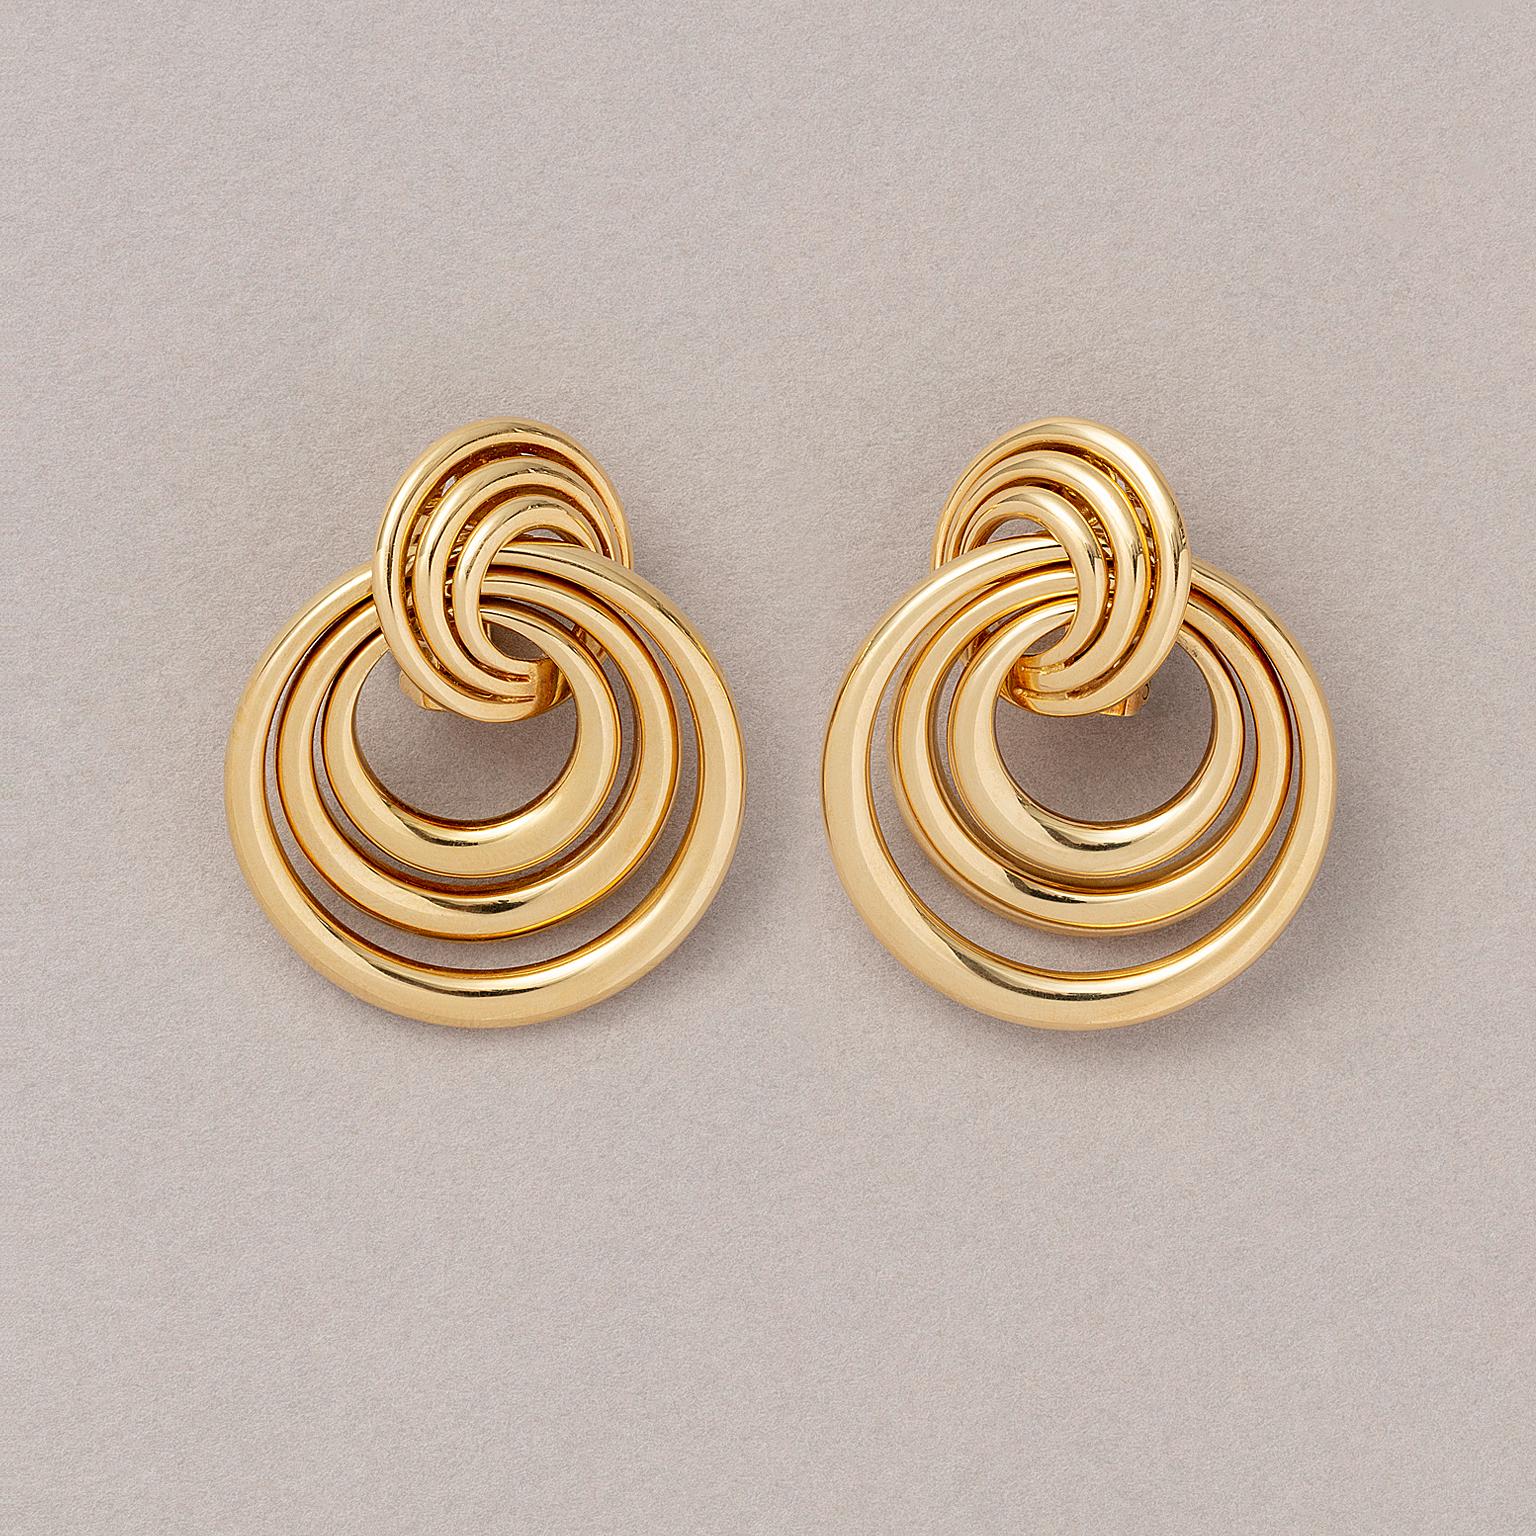 A pair of 18-carat yellow gold earrings consisting of three hoops dangling through three smaller hoops. Signed, dated and numbered: Cartier 1993 C23658. In original box.

weight: 28.95 grams
dimensions: 40 x 32 mm